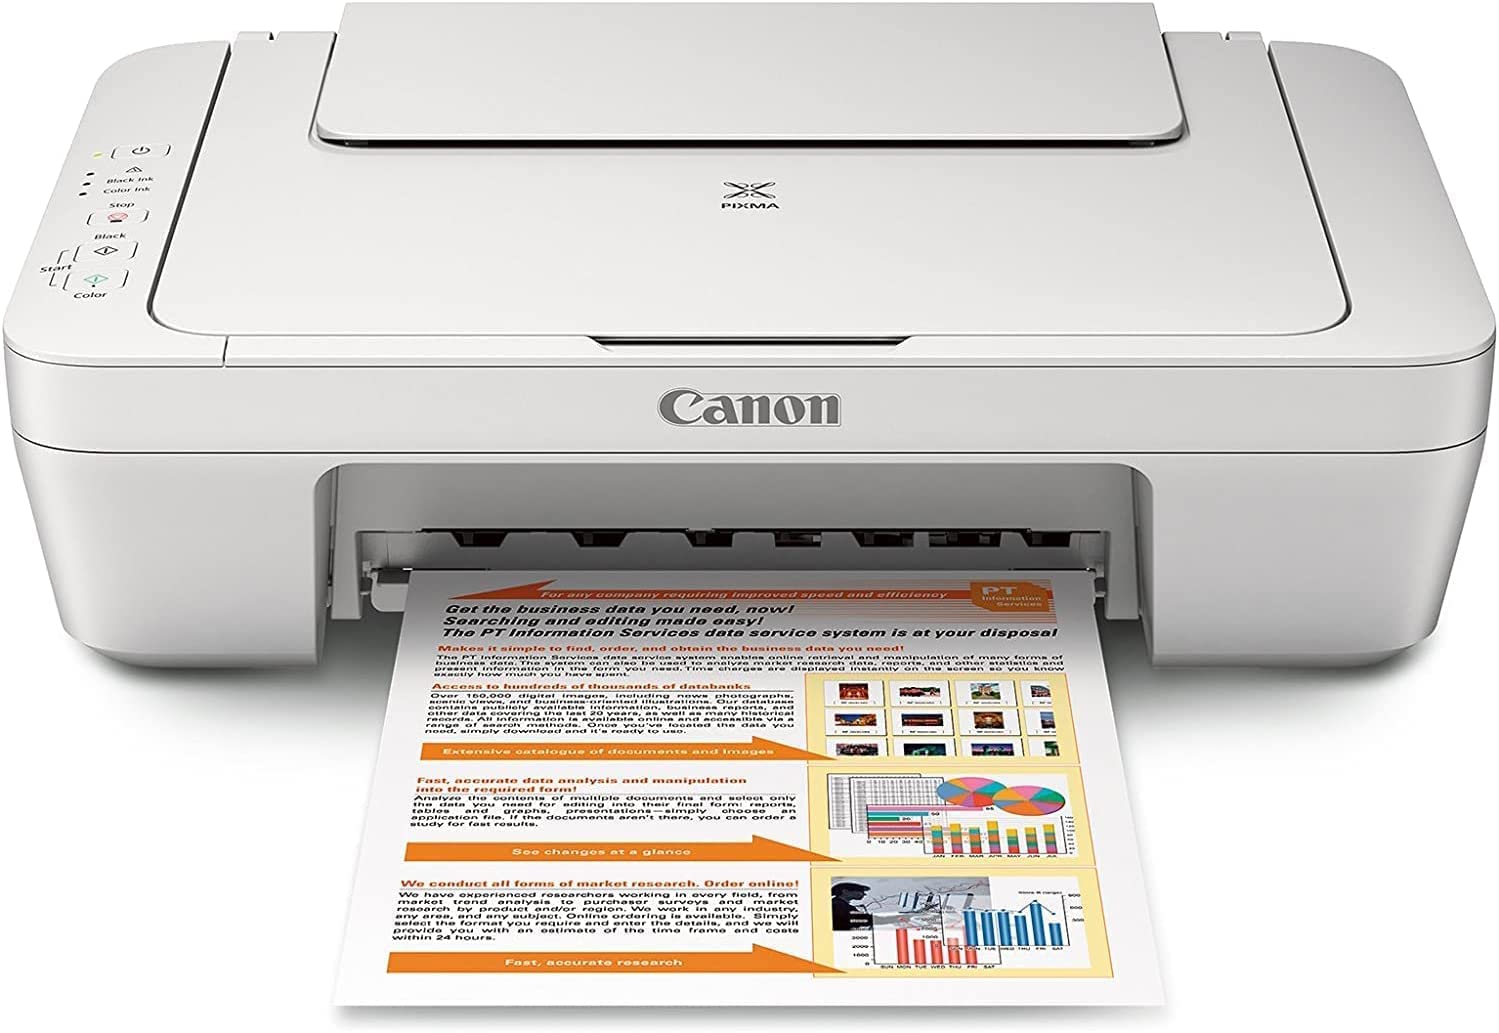 Canon PIXMA MG2520 - Multifunction printer - color - ink-jet - 8.5 in x 11.7 in (original) - A4/Legal (media) - up to 8 ipm (printing) - 60 sheets - USB 2.0 - image 2 of 5